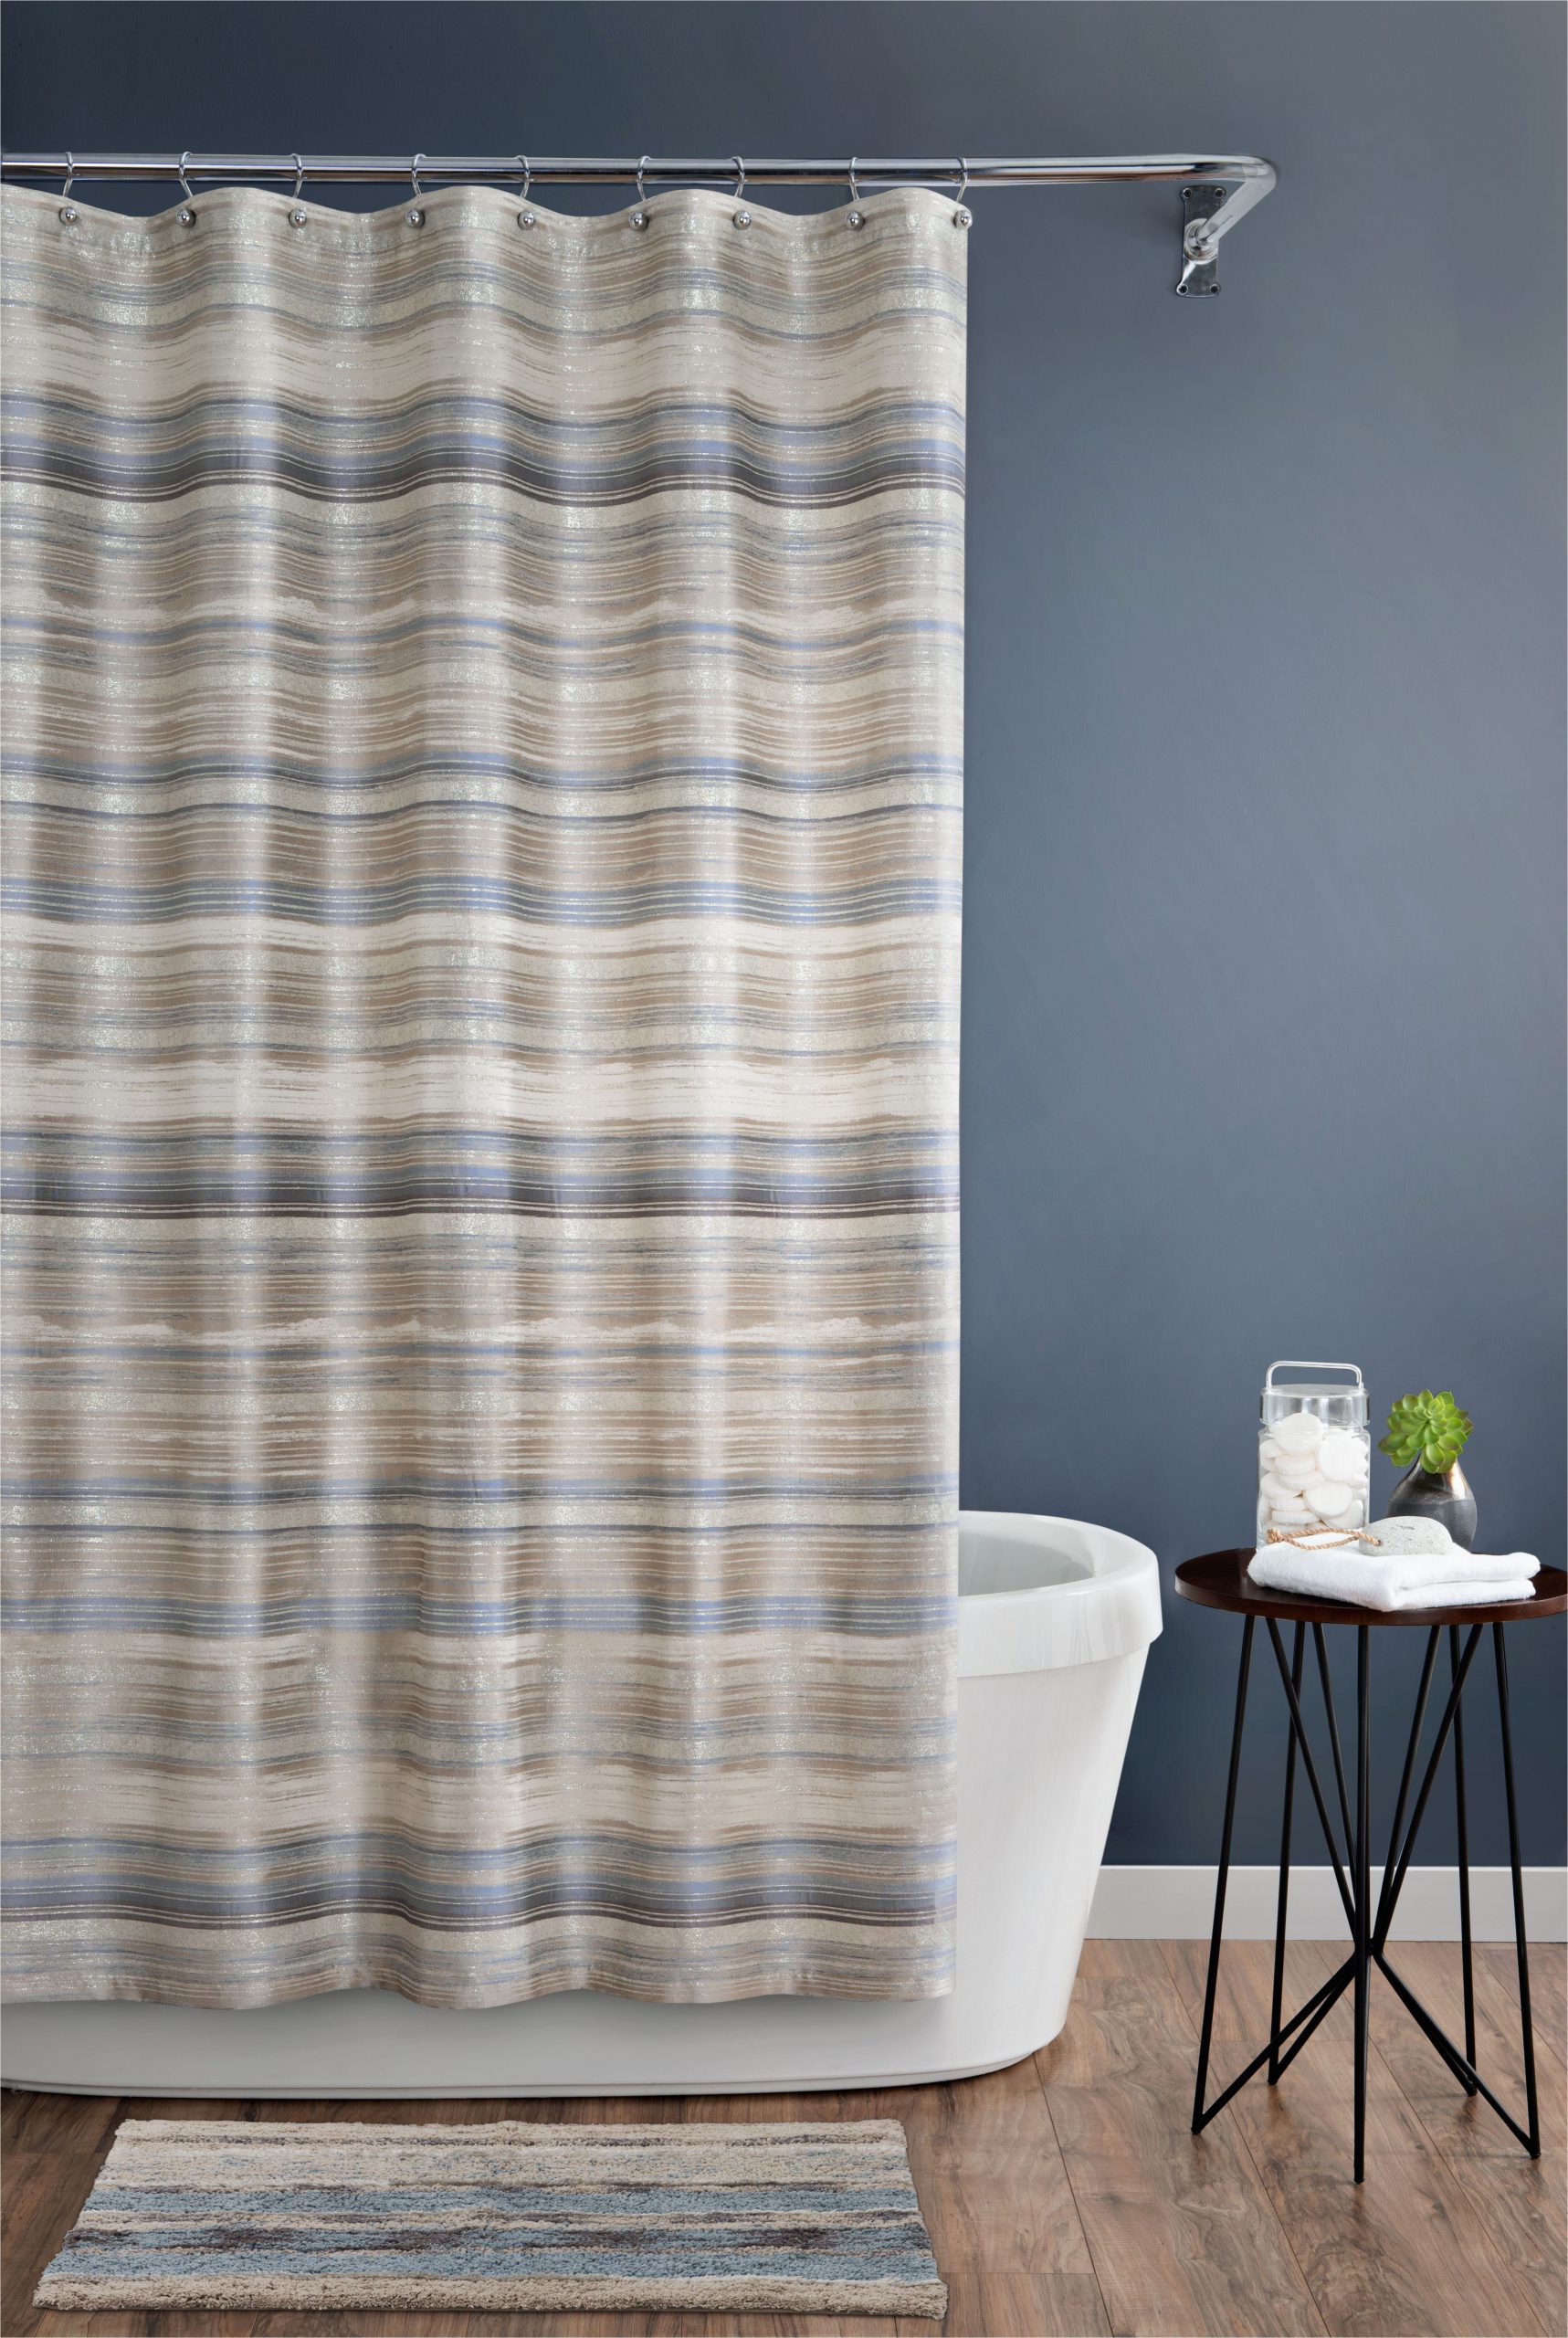 Croscill Bath Rugs Discontinued 10 Shower Curtains Croscill Images In 2020